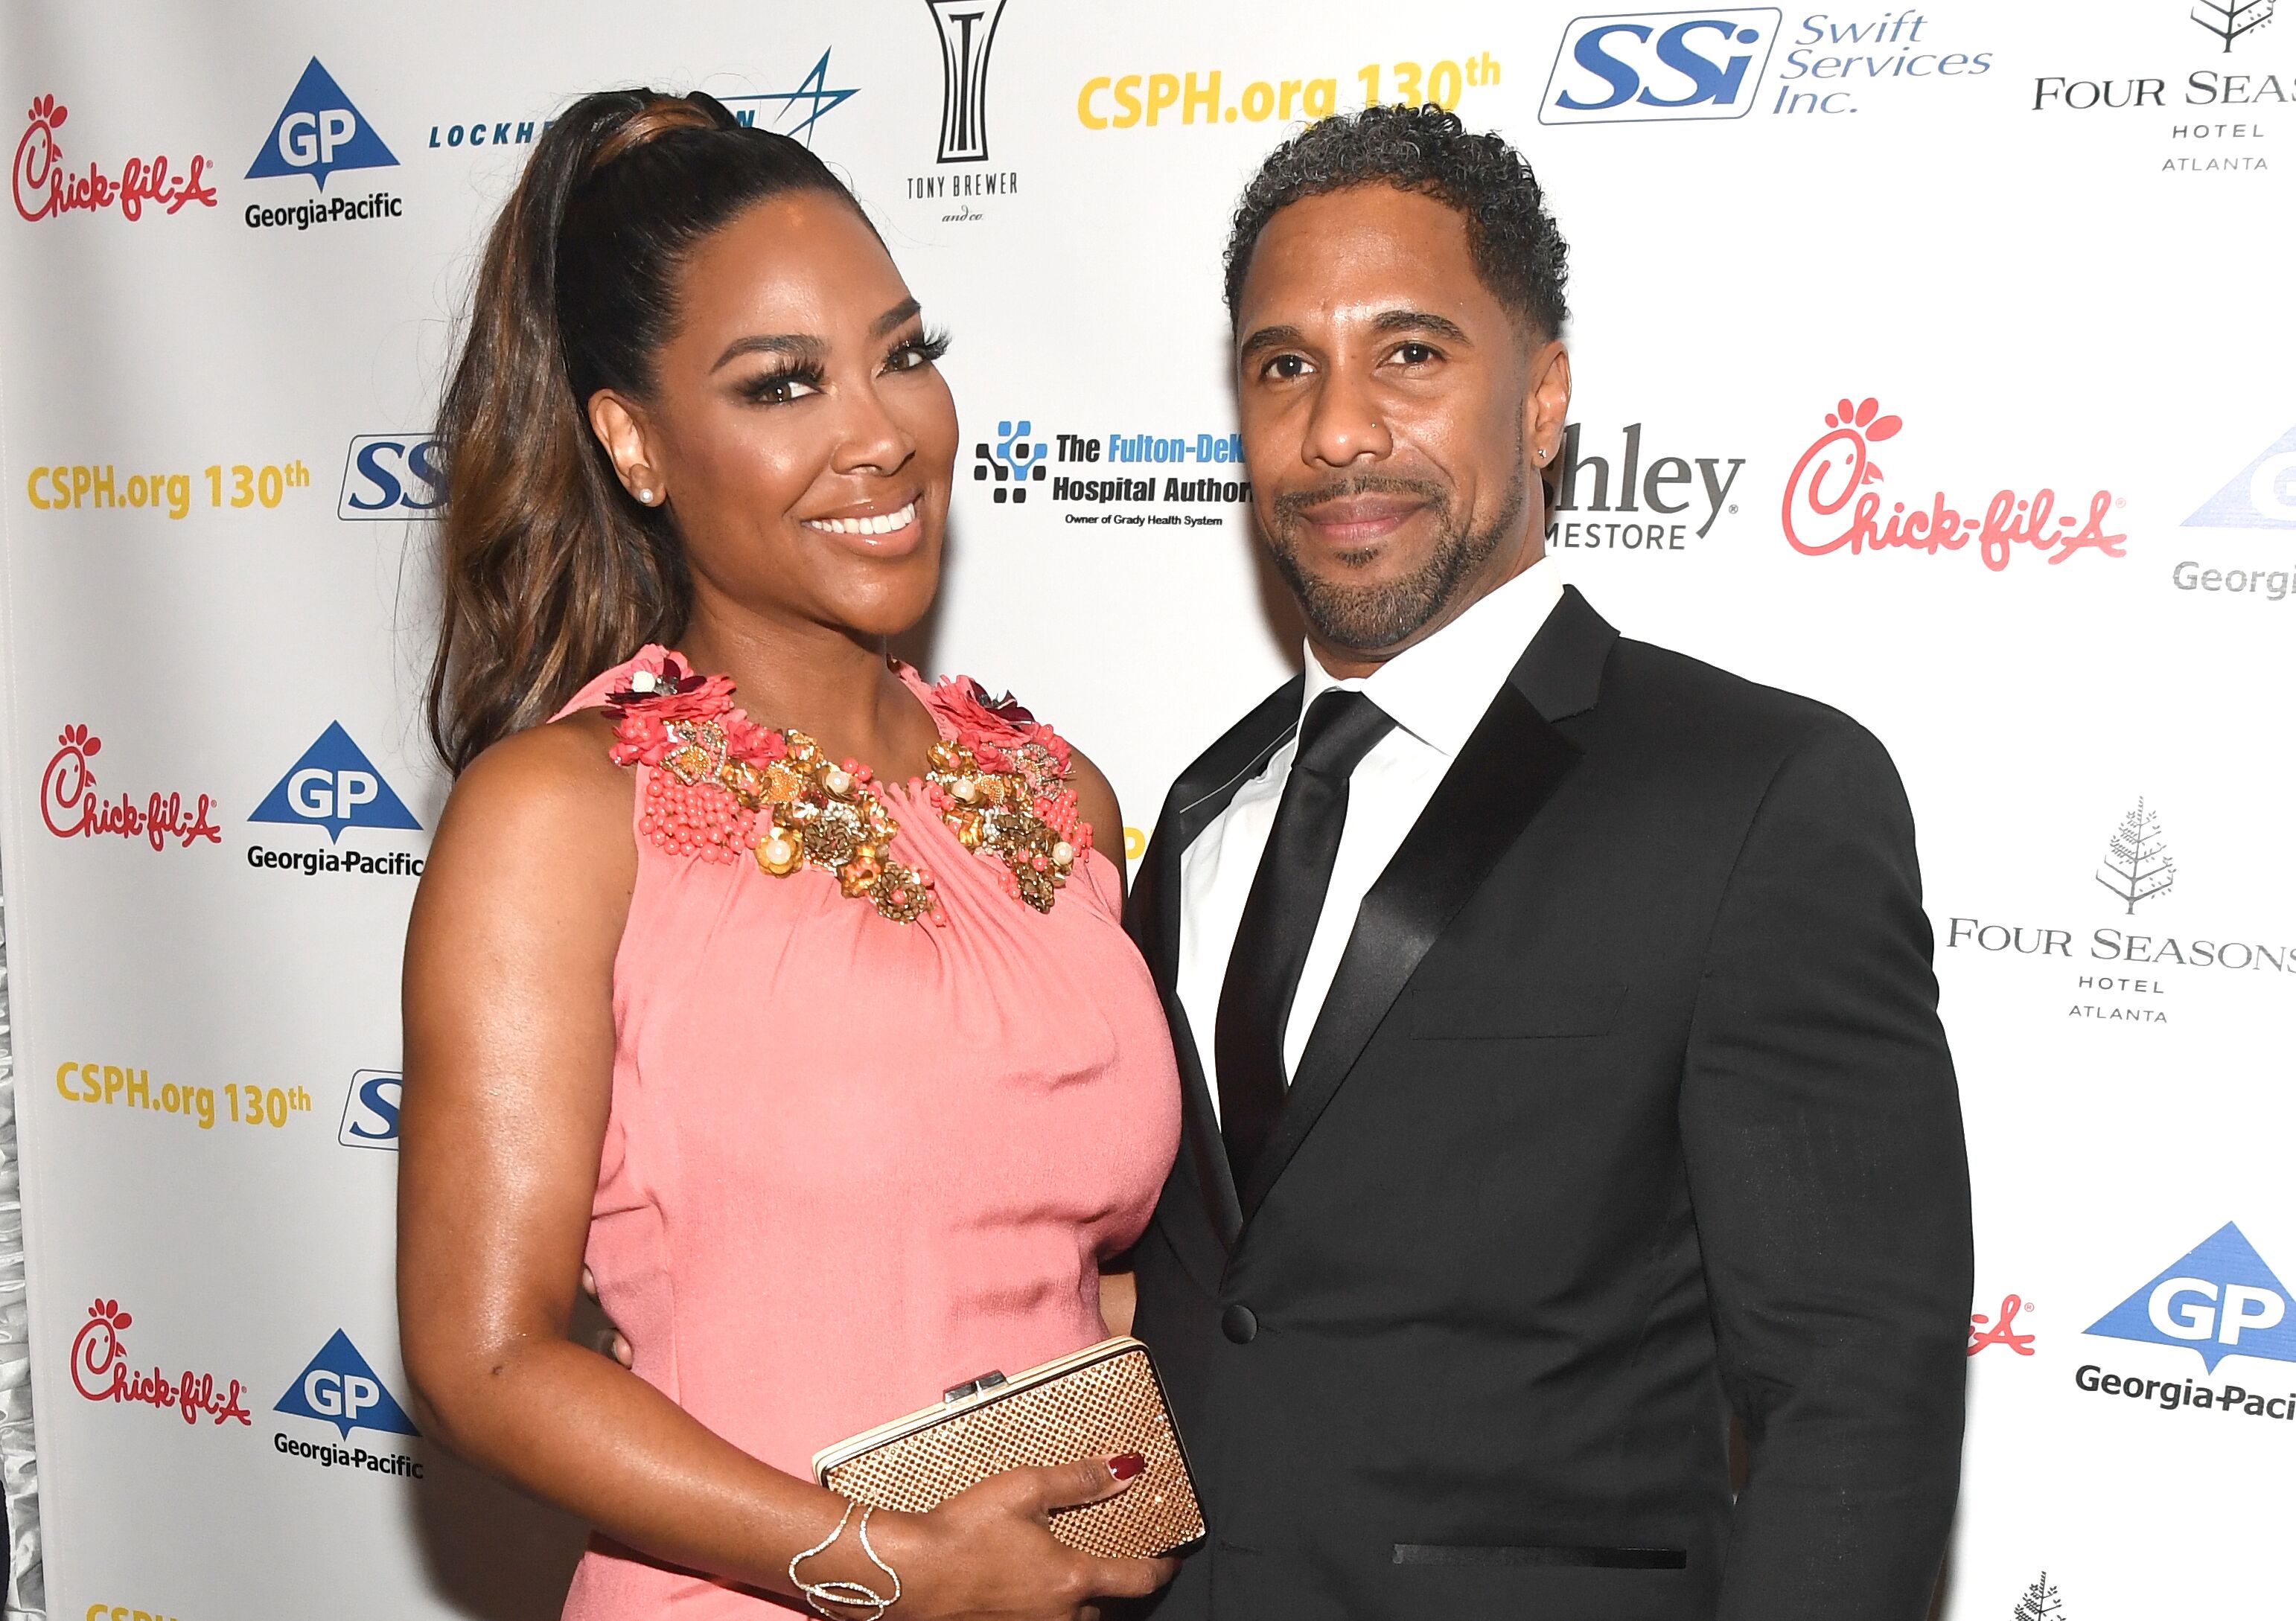 Kenya Moore and Marc Daly attending an event together | Source: Getty Images/GlobalImagesUkraine